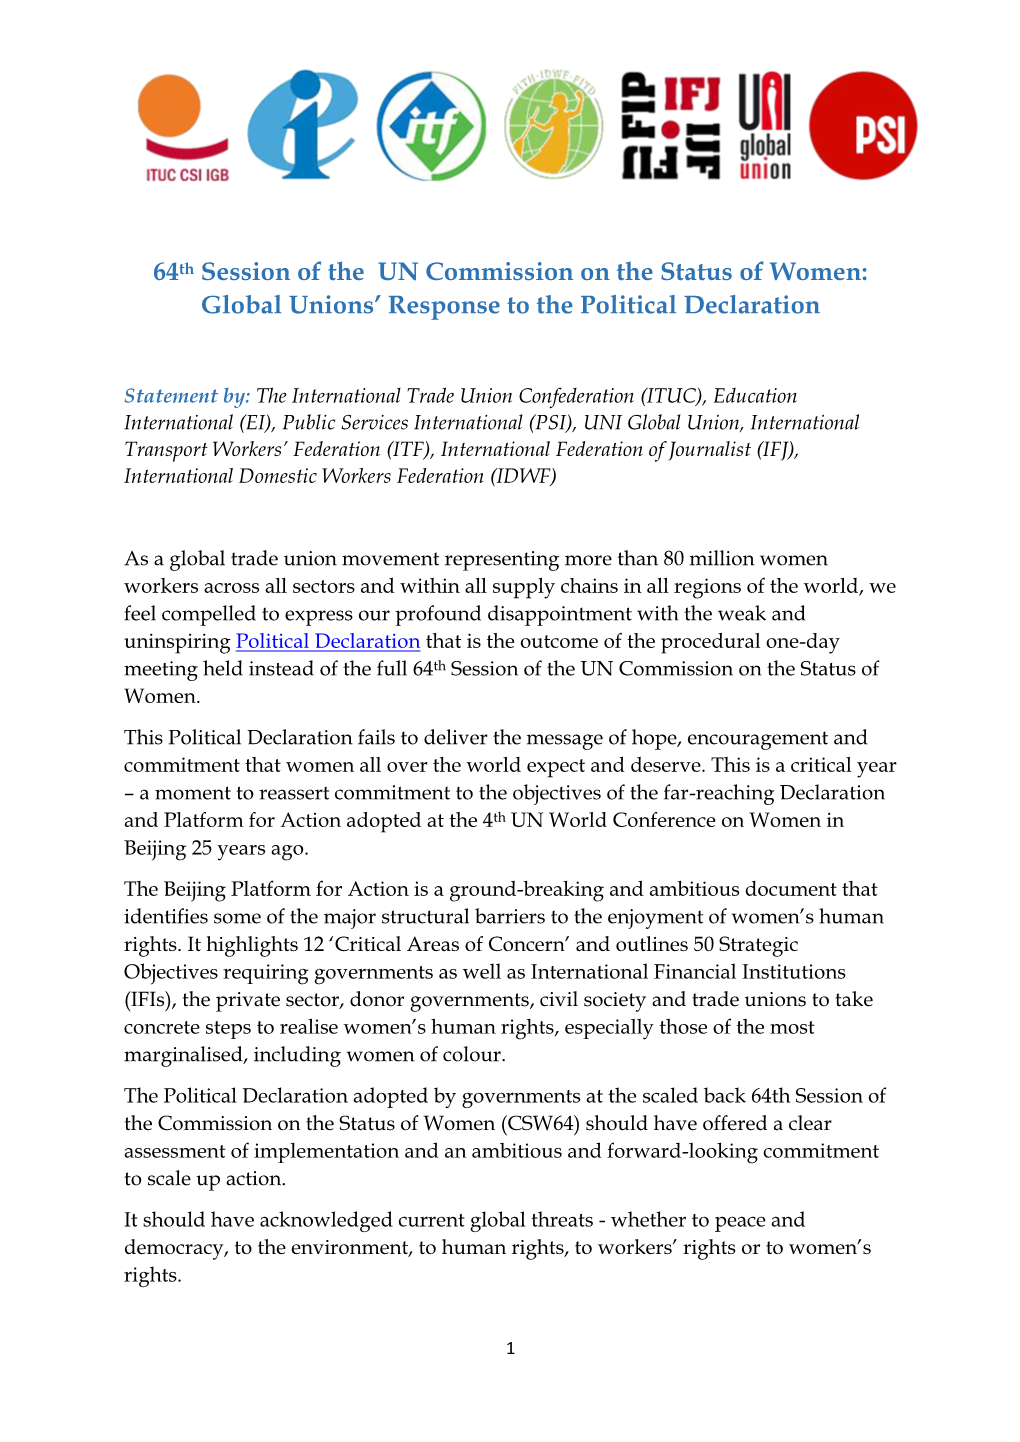 64Th Session of the UN Commission on the Status of Women: Global Unions’ Response to the Political Declaration